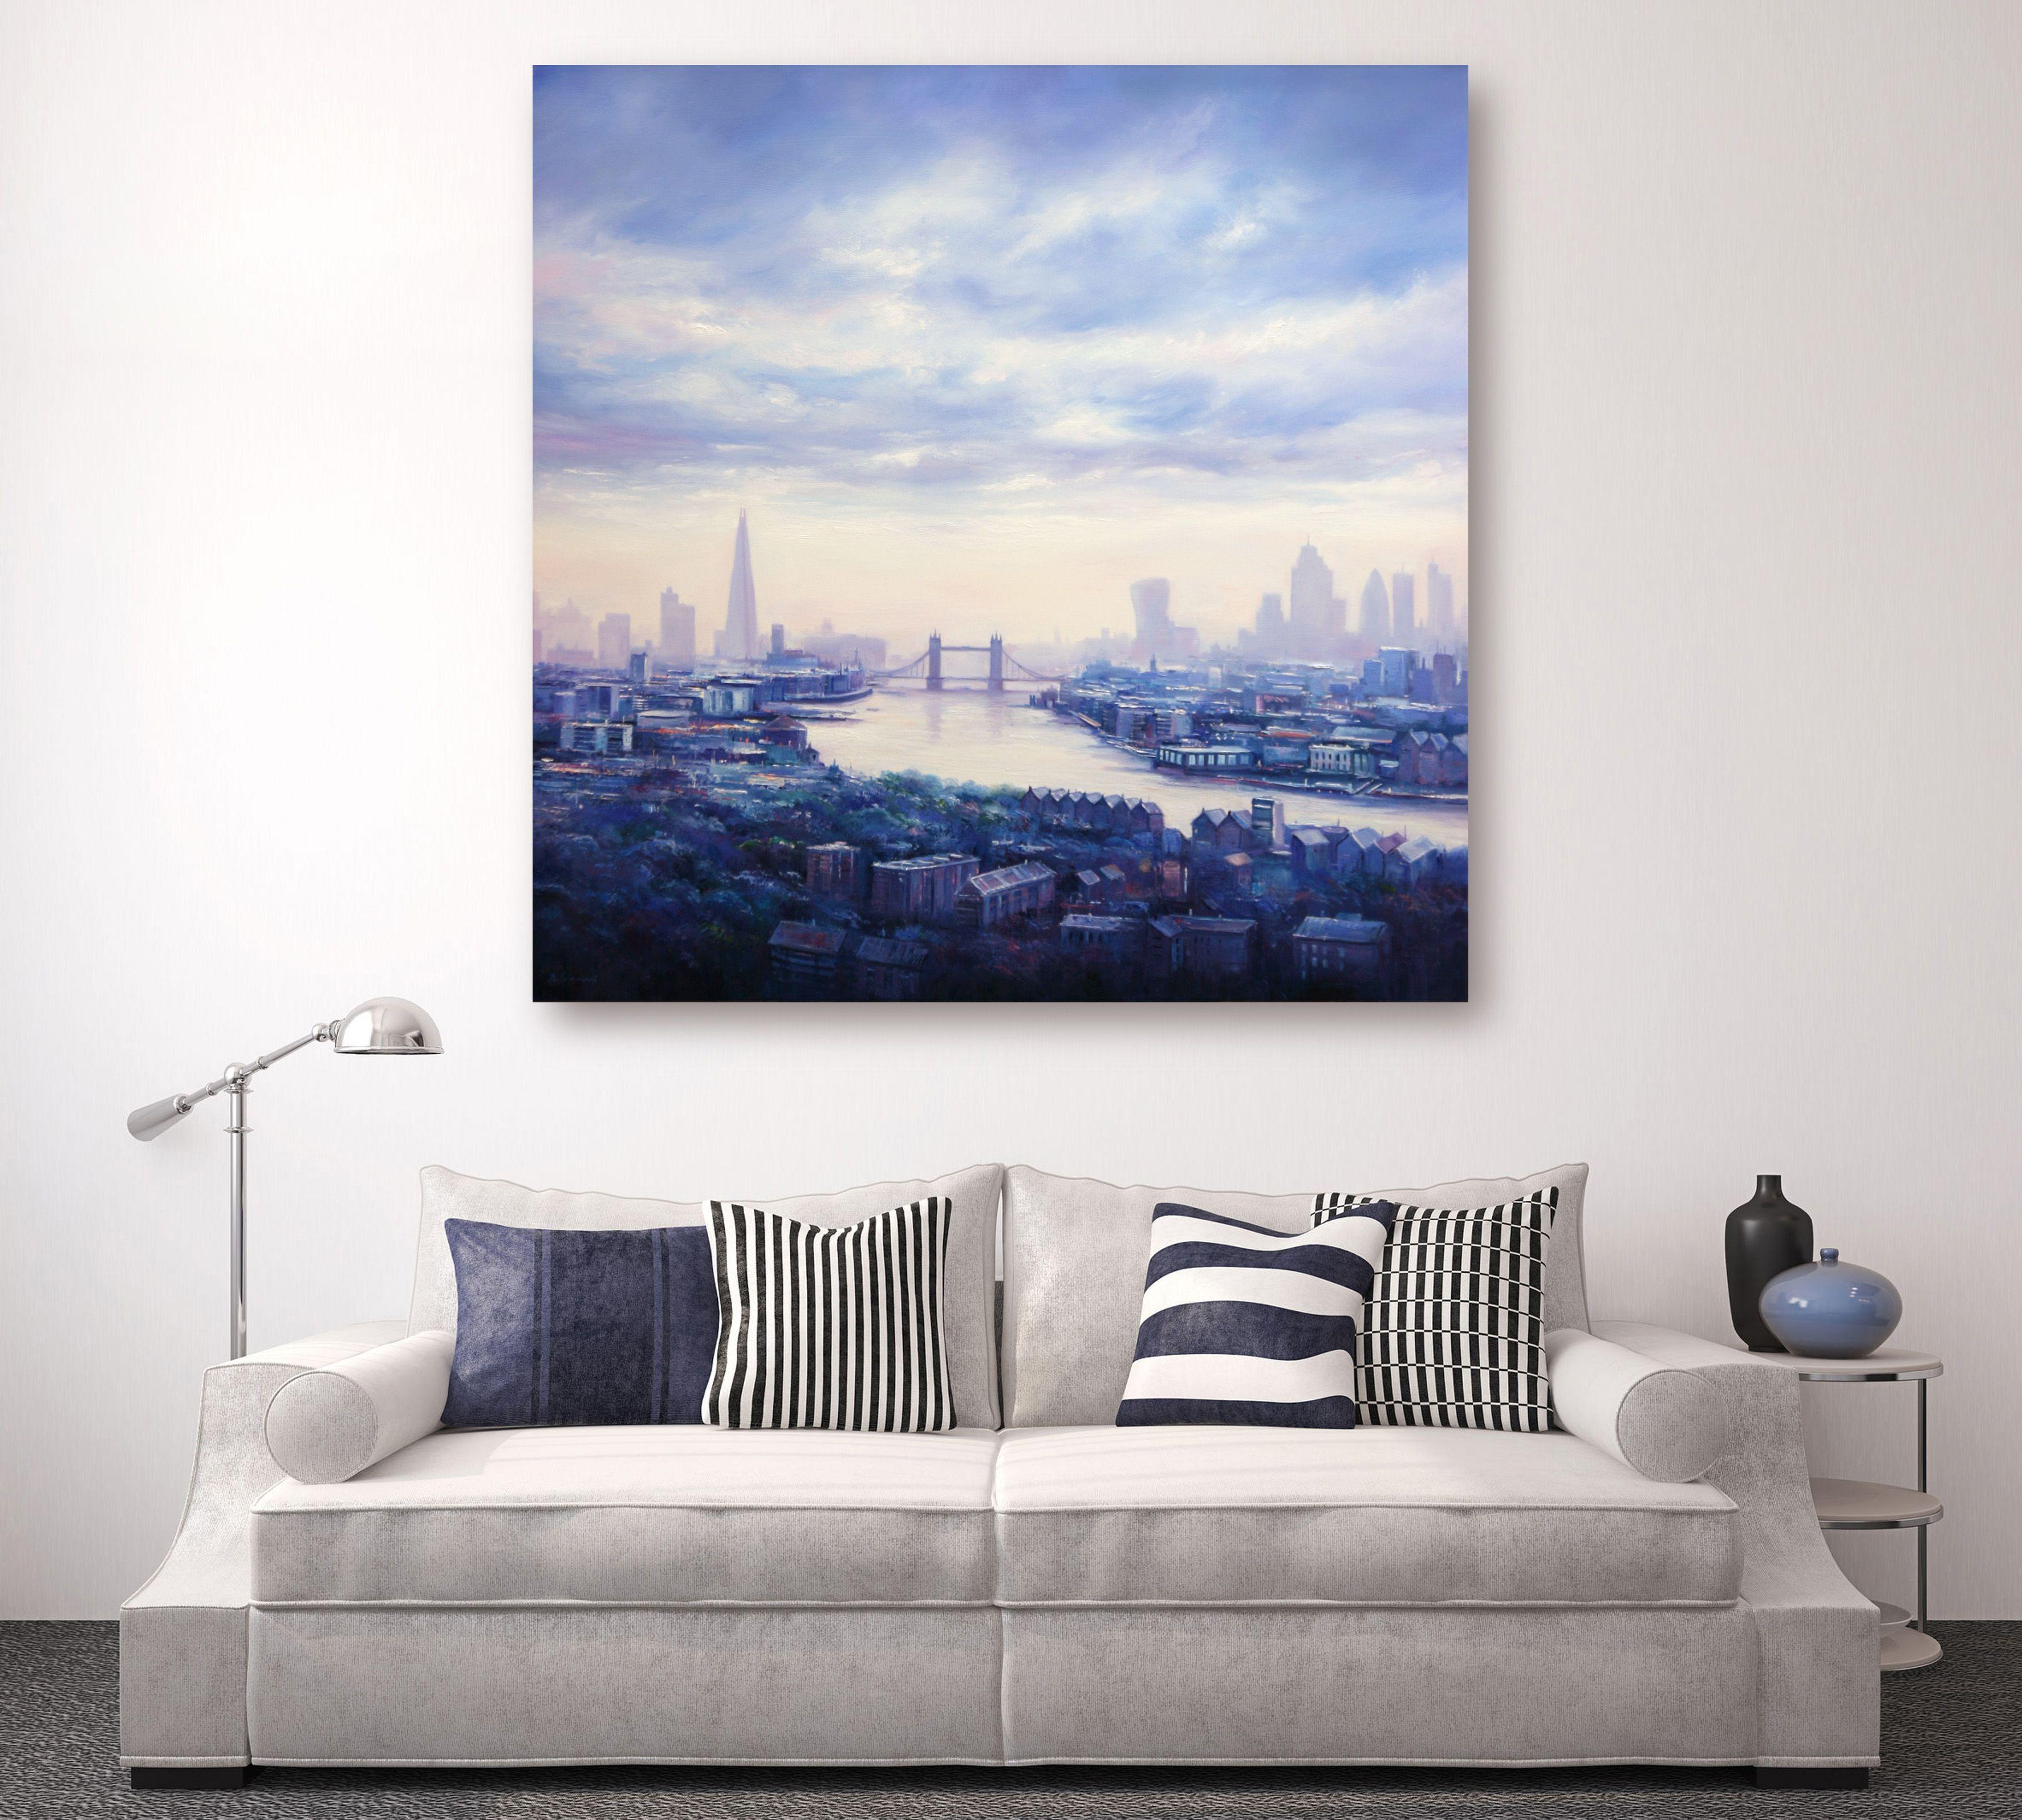 An atmospheric painting of London with River Thames.  Original cityscape painting.  It was painted in multiple layers with palette knife and brushes.  The artwork is signed on the front and includes a Certificate of Authenticity.  The painting is